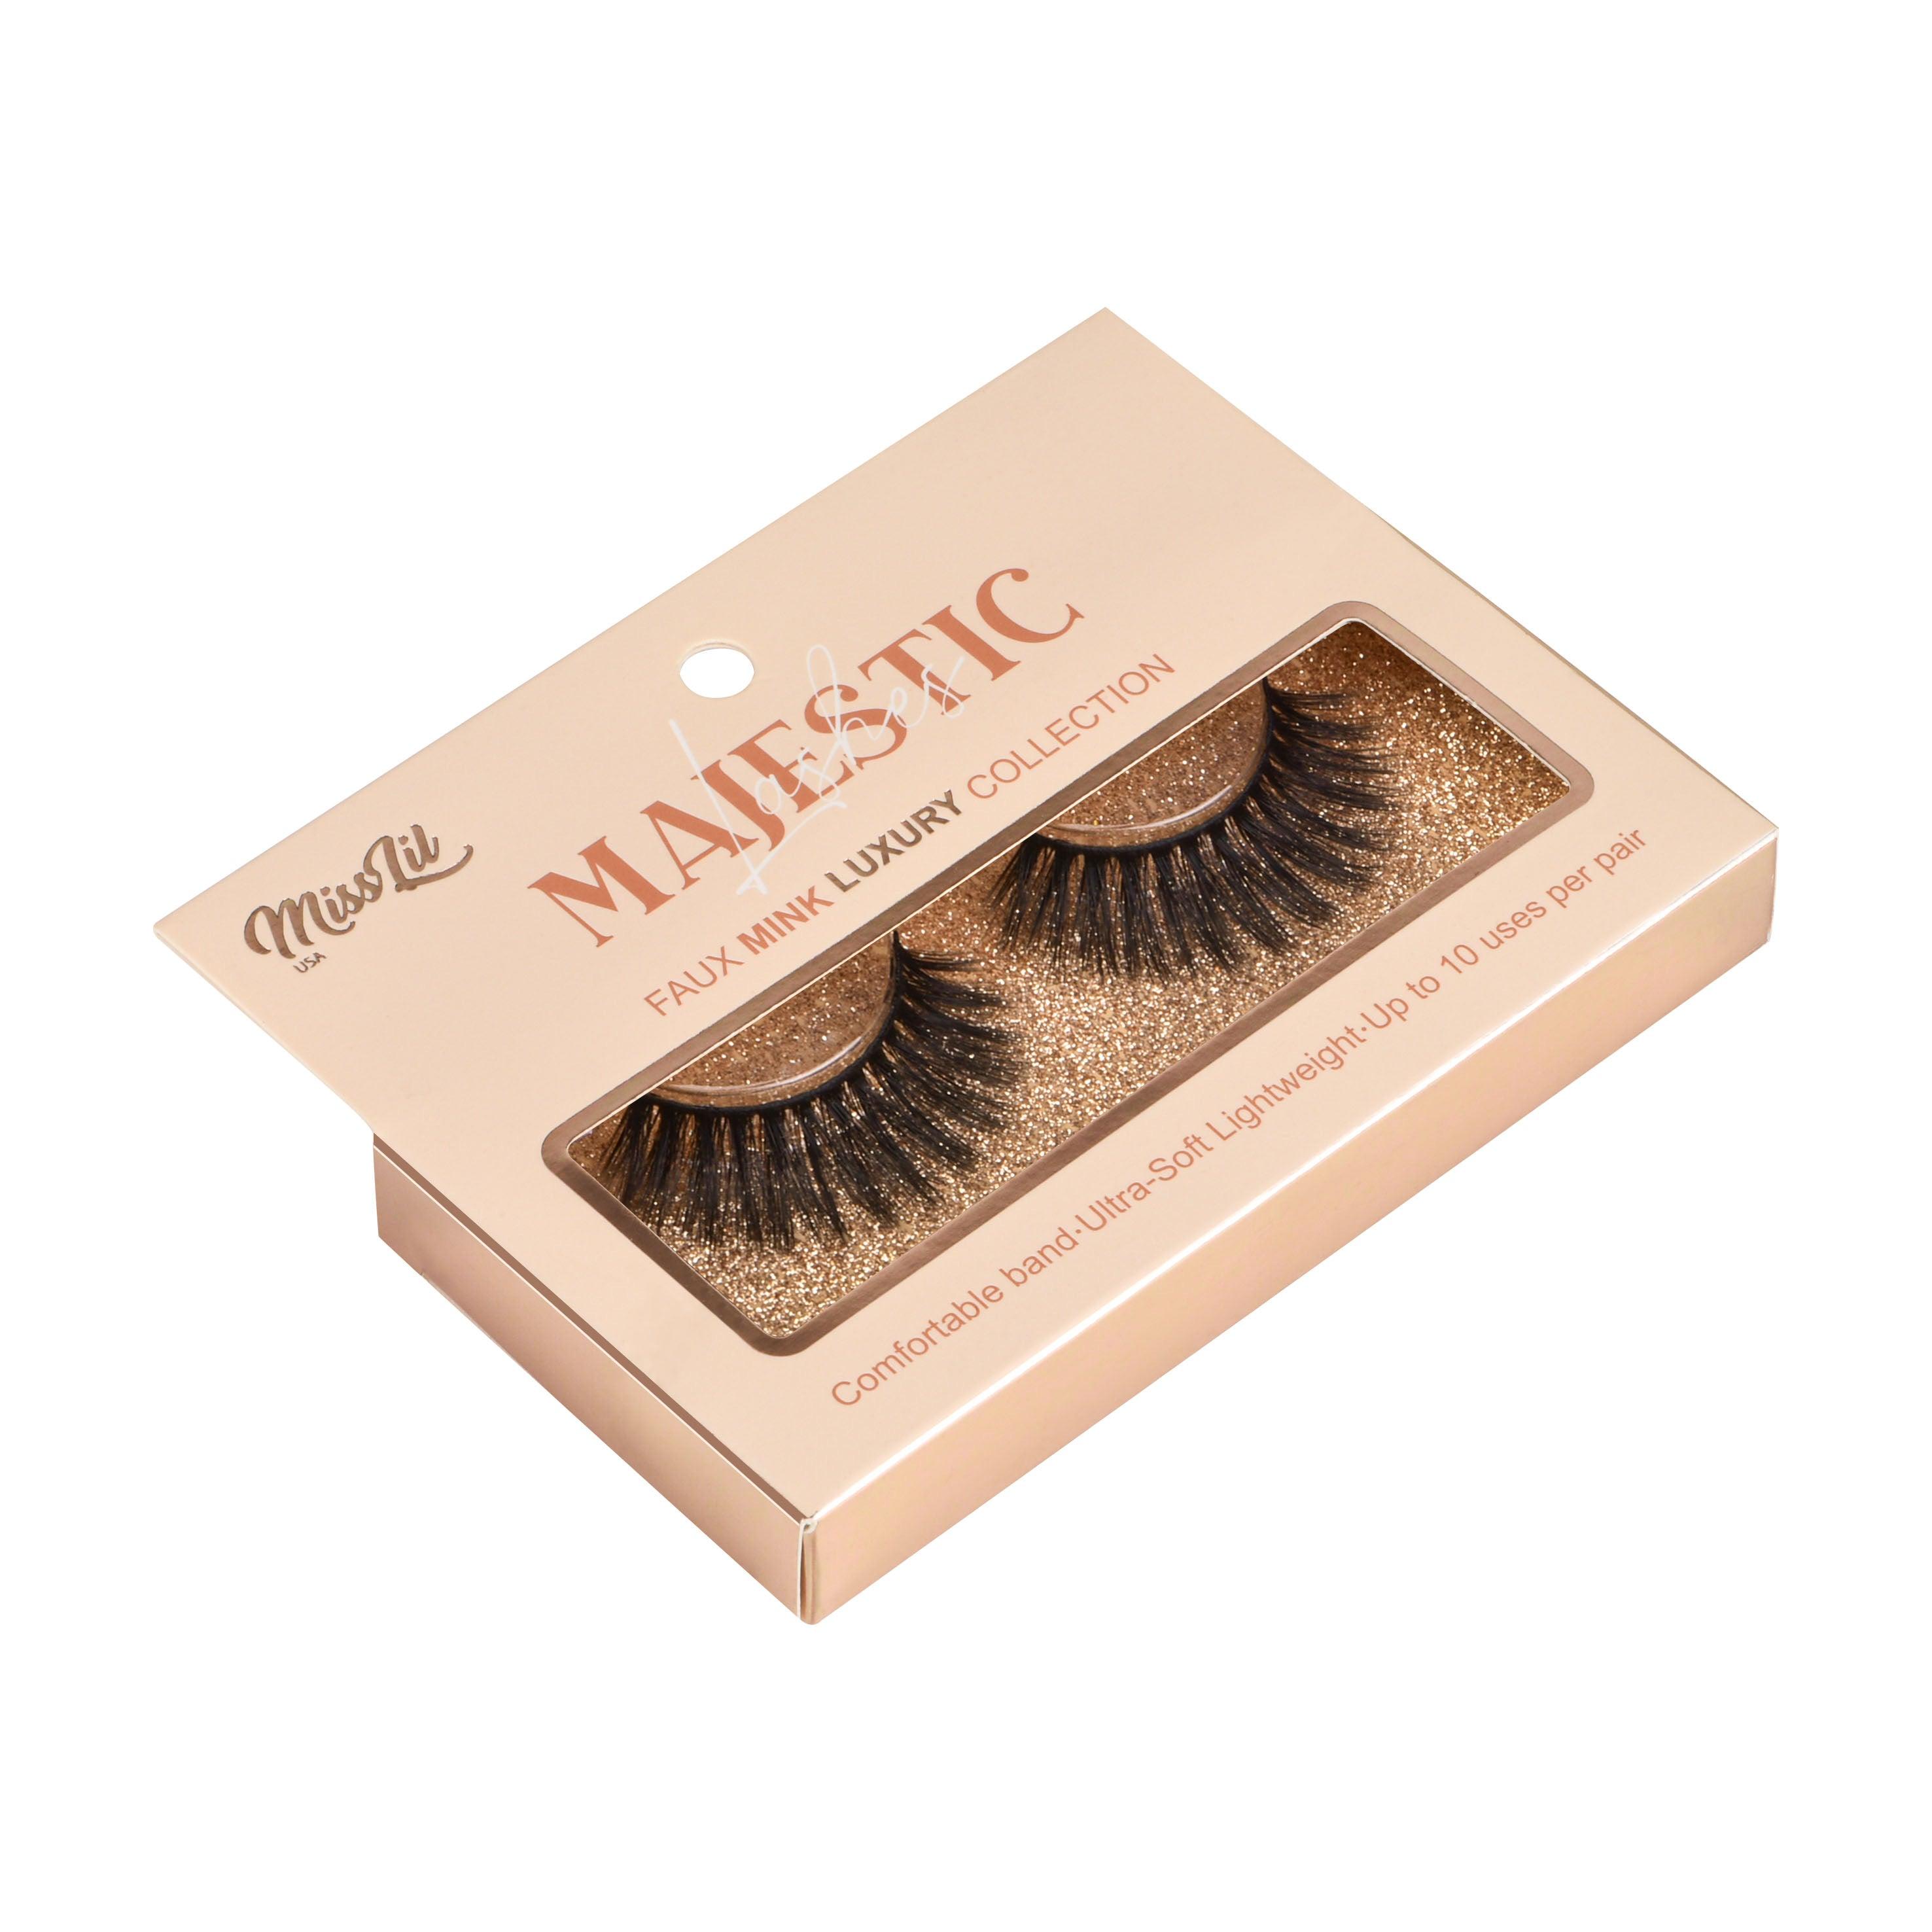 1-PAIR LASHES-MAJESTIC COLLECTION #6 (PACK OF 3) - Miss Lil USA